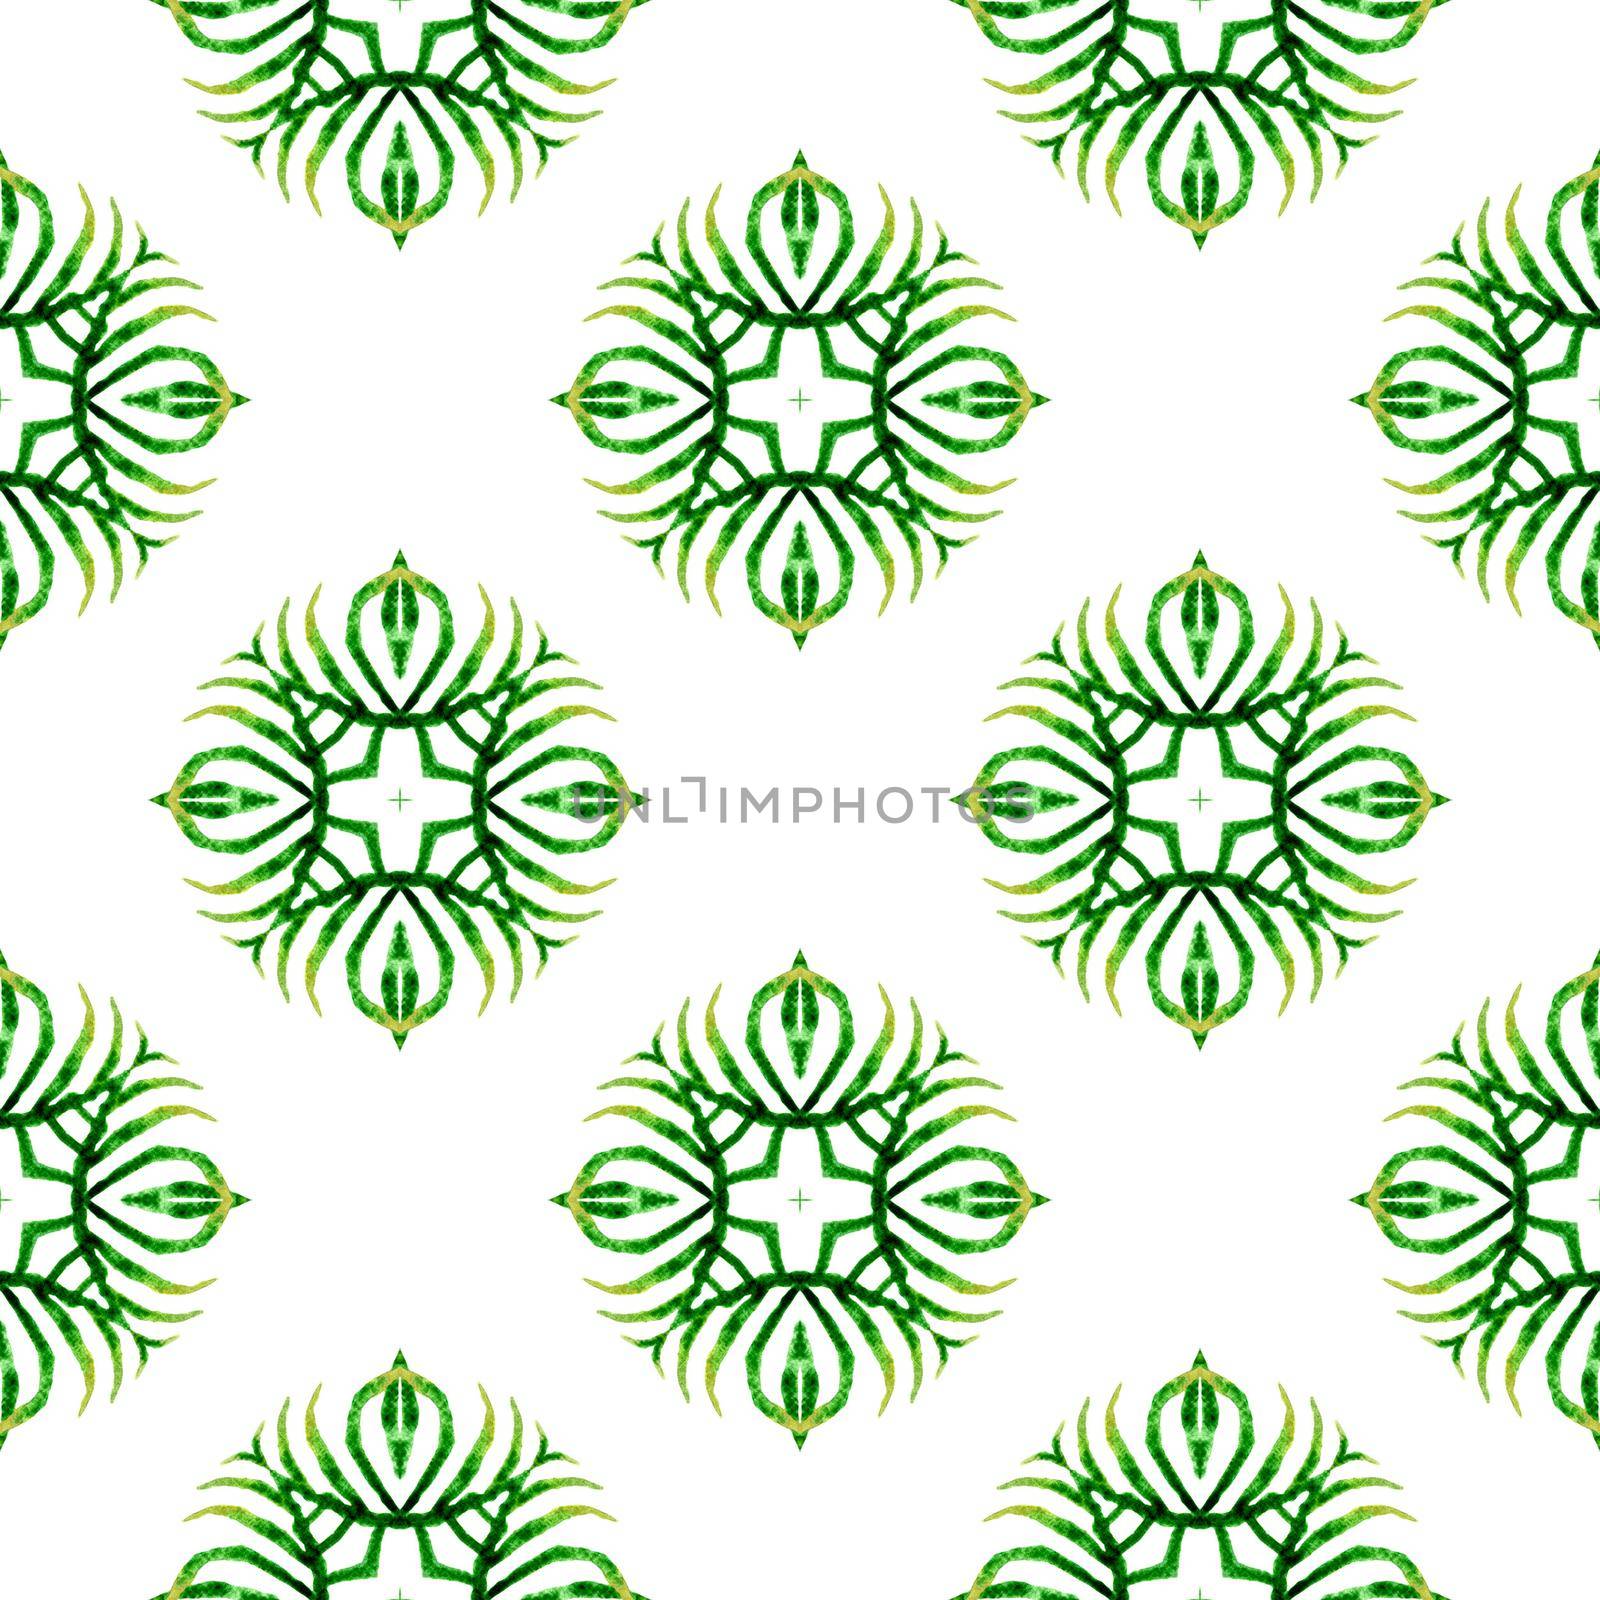 Textile ready attractive print, swimwear fabric, wallpaper, wrapping. Green unique boho chic summer design. Summer exotic seamless border. Exotic seamless pattern.